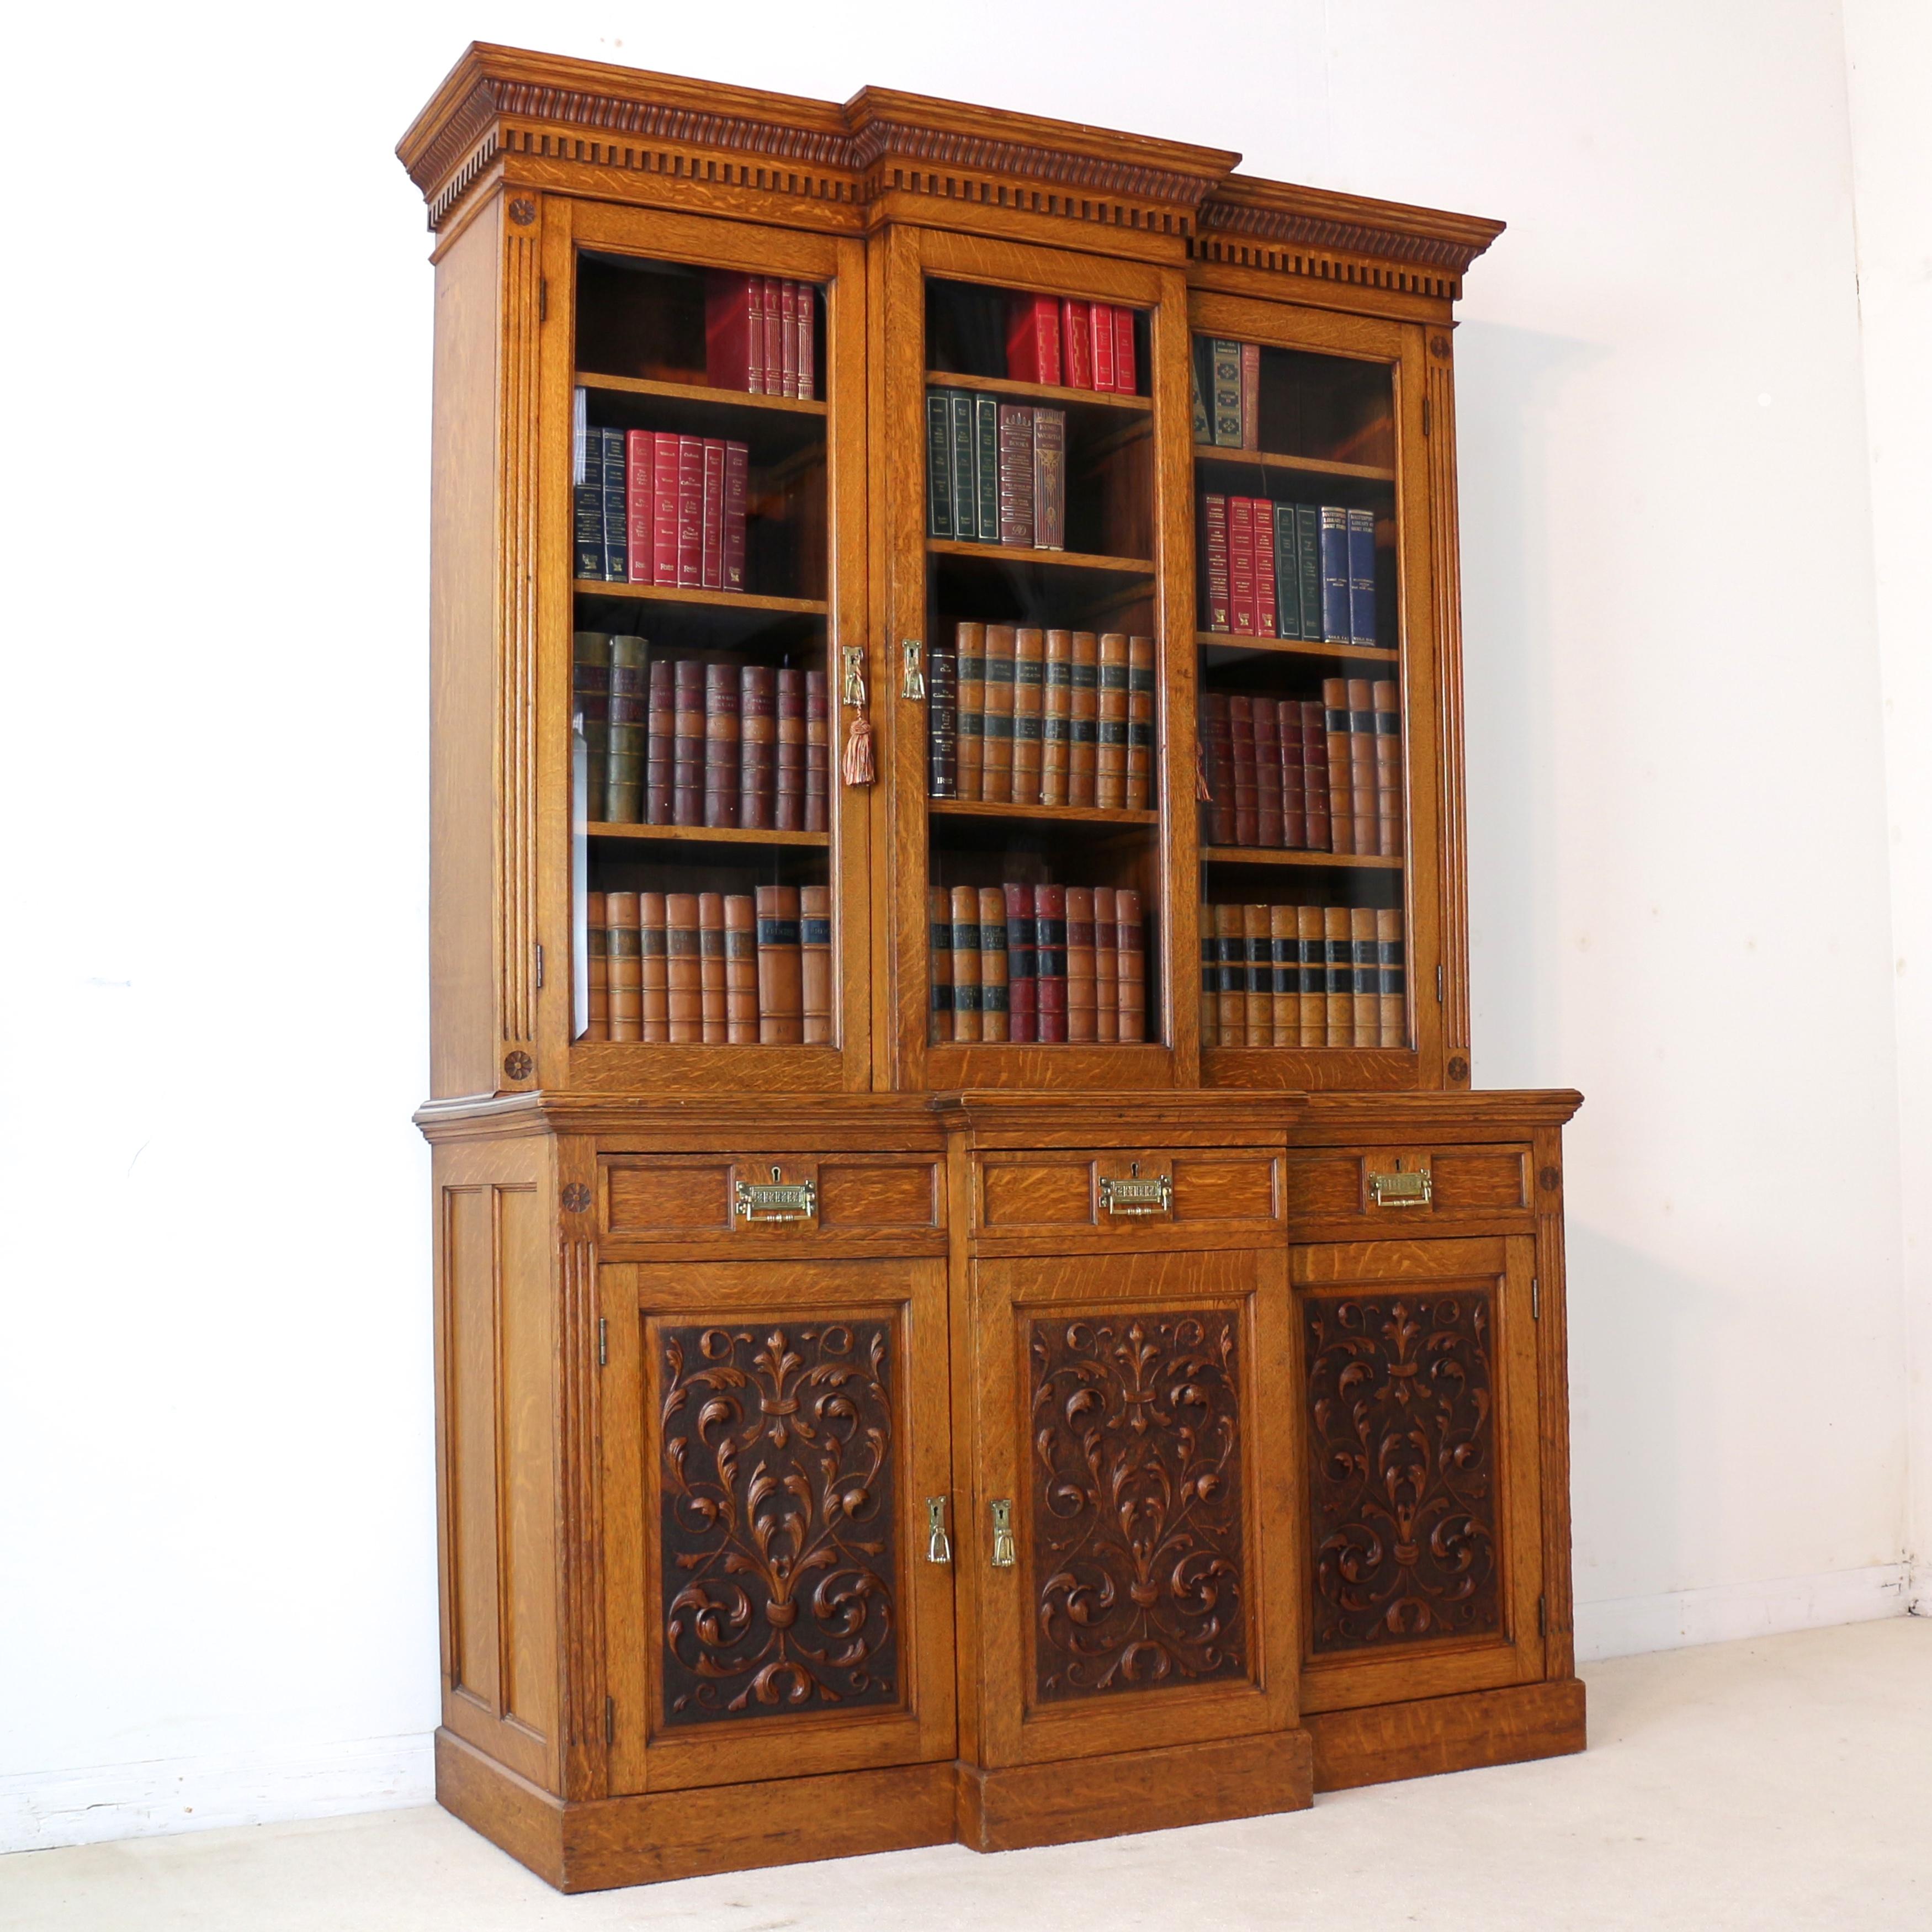 A beautiful Victorian three door breakfront bookcase or display cabinet attributed to Maple & Co and in the Art Nouveau/Arts & Crafts taste. In golden quarter-sawn oak with bevelled glass panes to the glazed doors it features a reeded and dentil